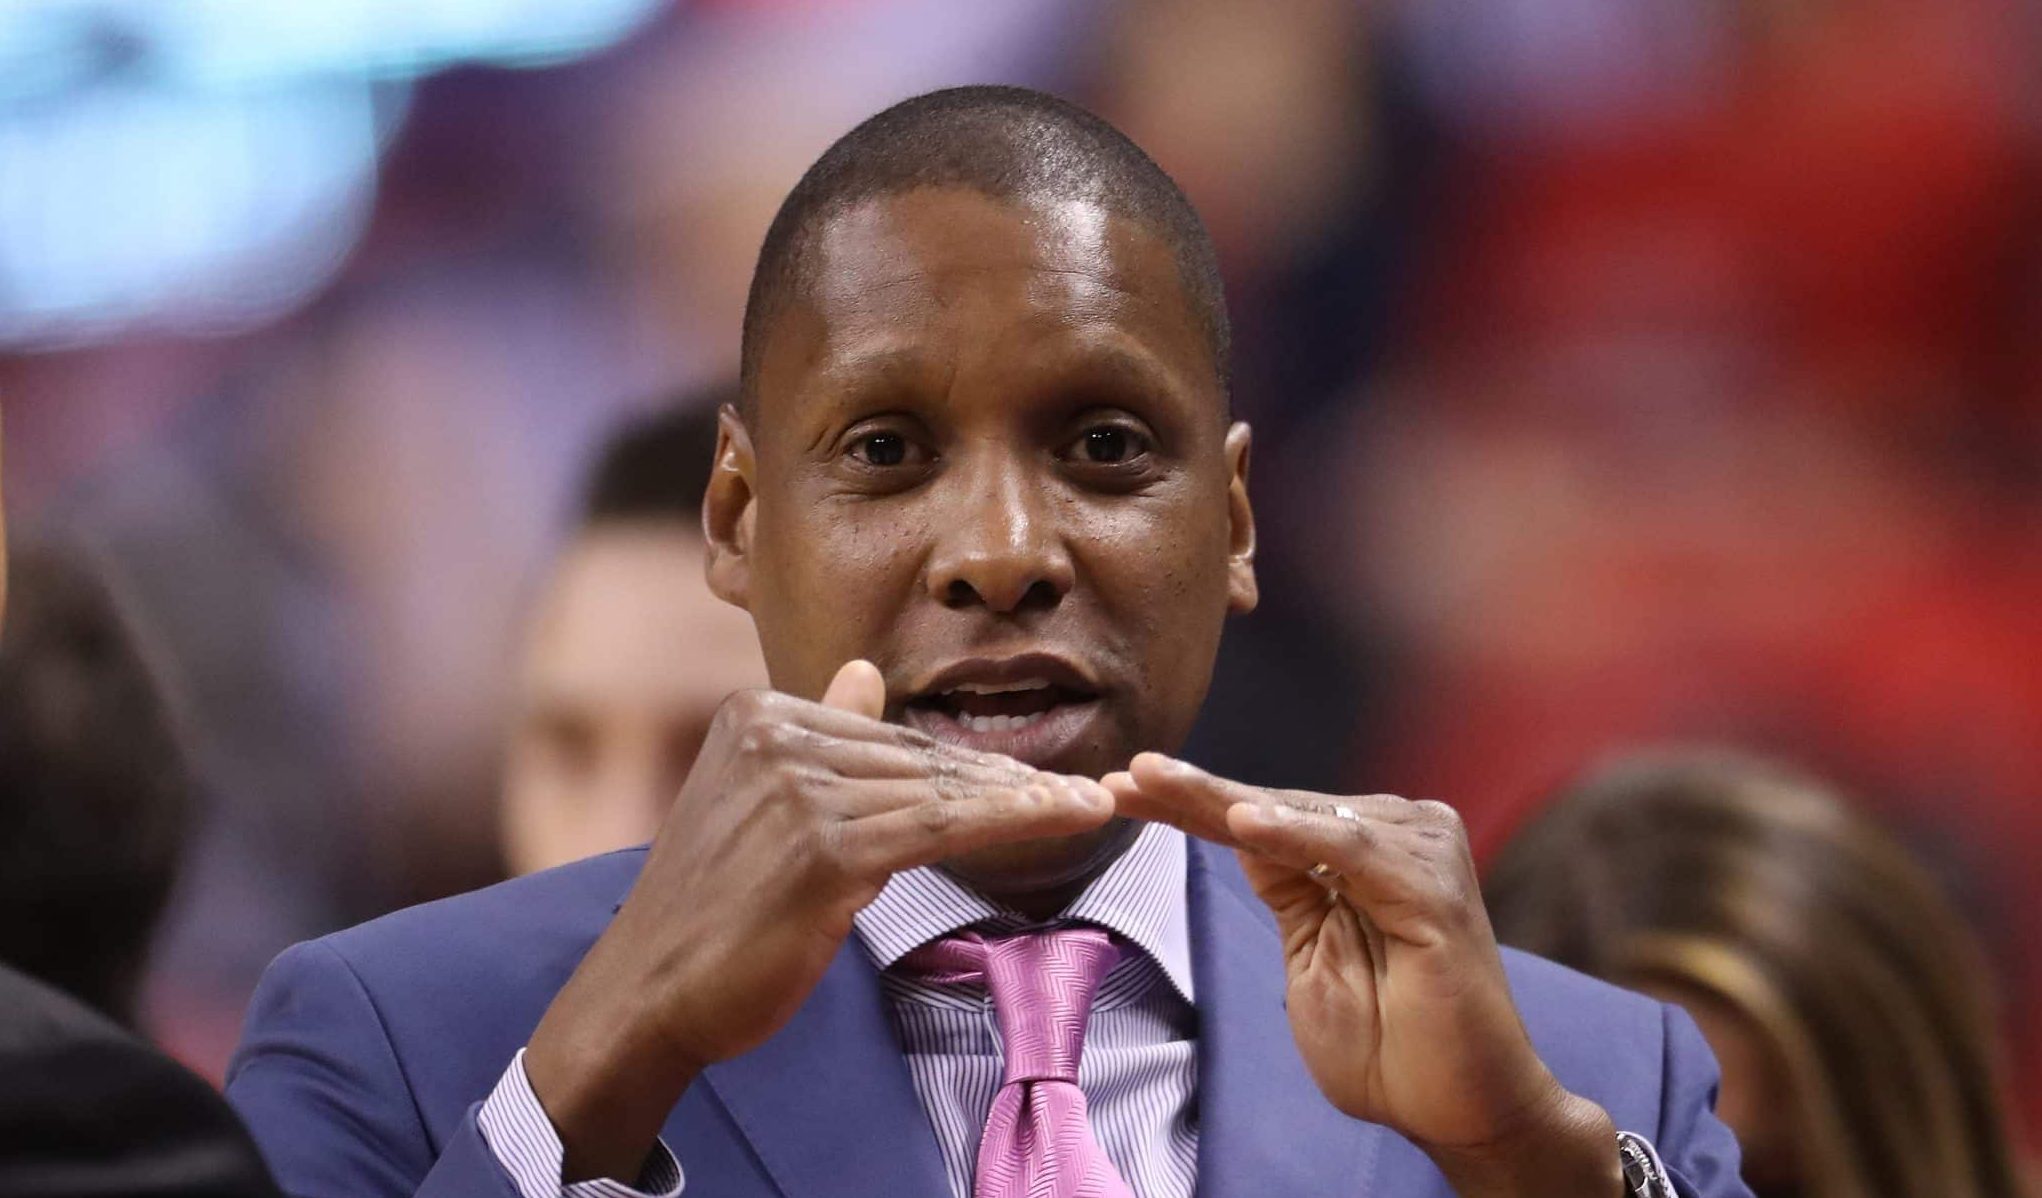 TORONTO, ON - MAY 21: General manager Masai Ujiri of the Toronto Raptors before the start of their game against the Cleveland Cavaliers in Game Three of the Eastern Conference Finals during the 2016 NBA Playoffs at the Air Canada Centre on May 21, 2016 in Toronto, Ontario, Canada. NOTE TO USER: User expressly acknowledges and agrees that, by downloading and or using this photograph, User is consenting to the terms and conditions of the Getty Images License Agreement.